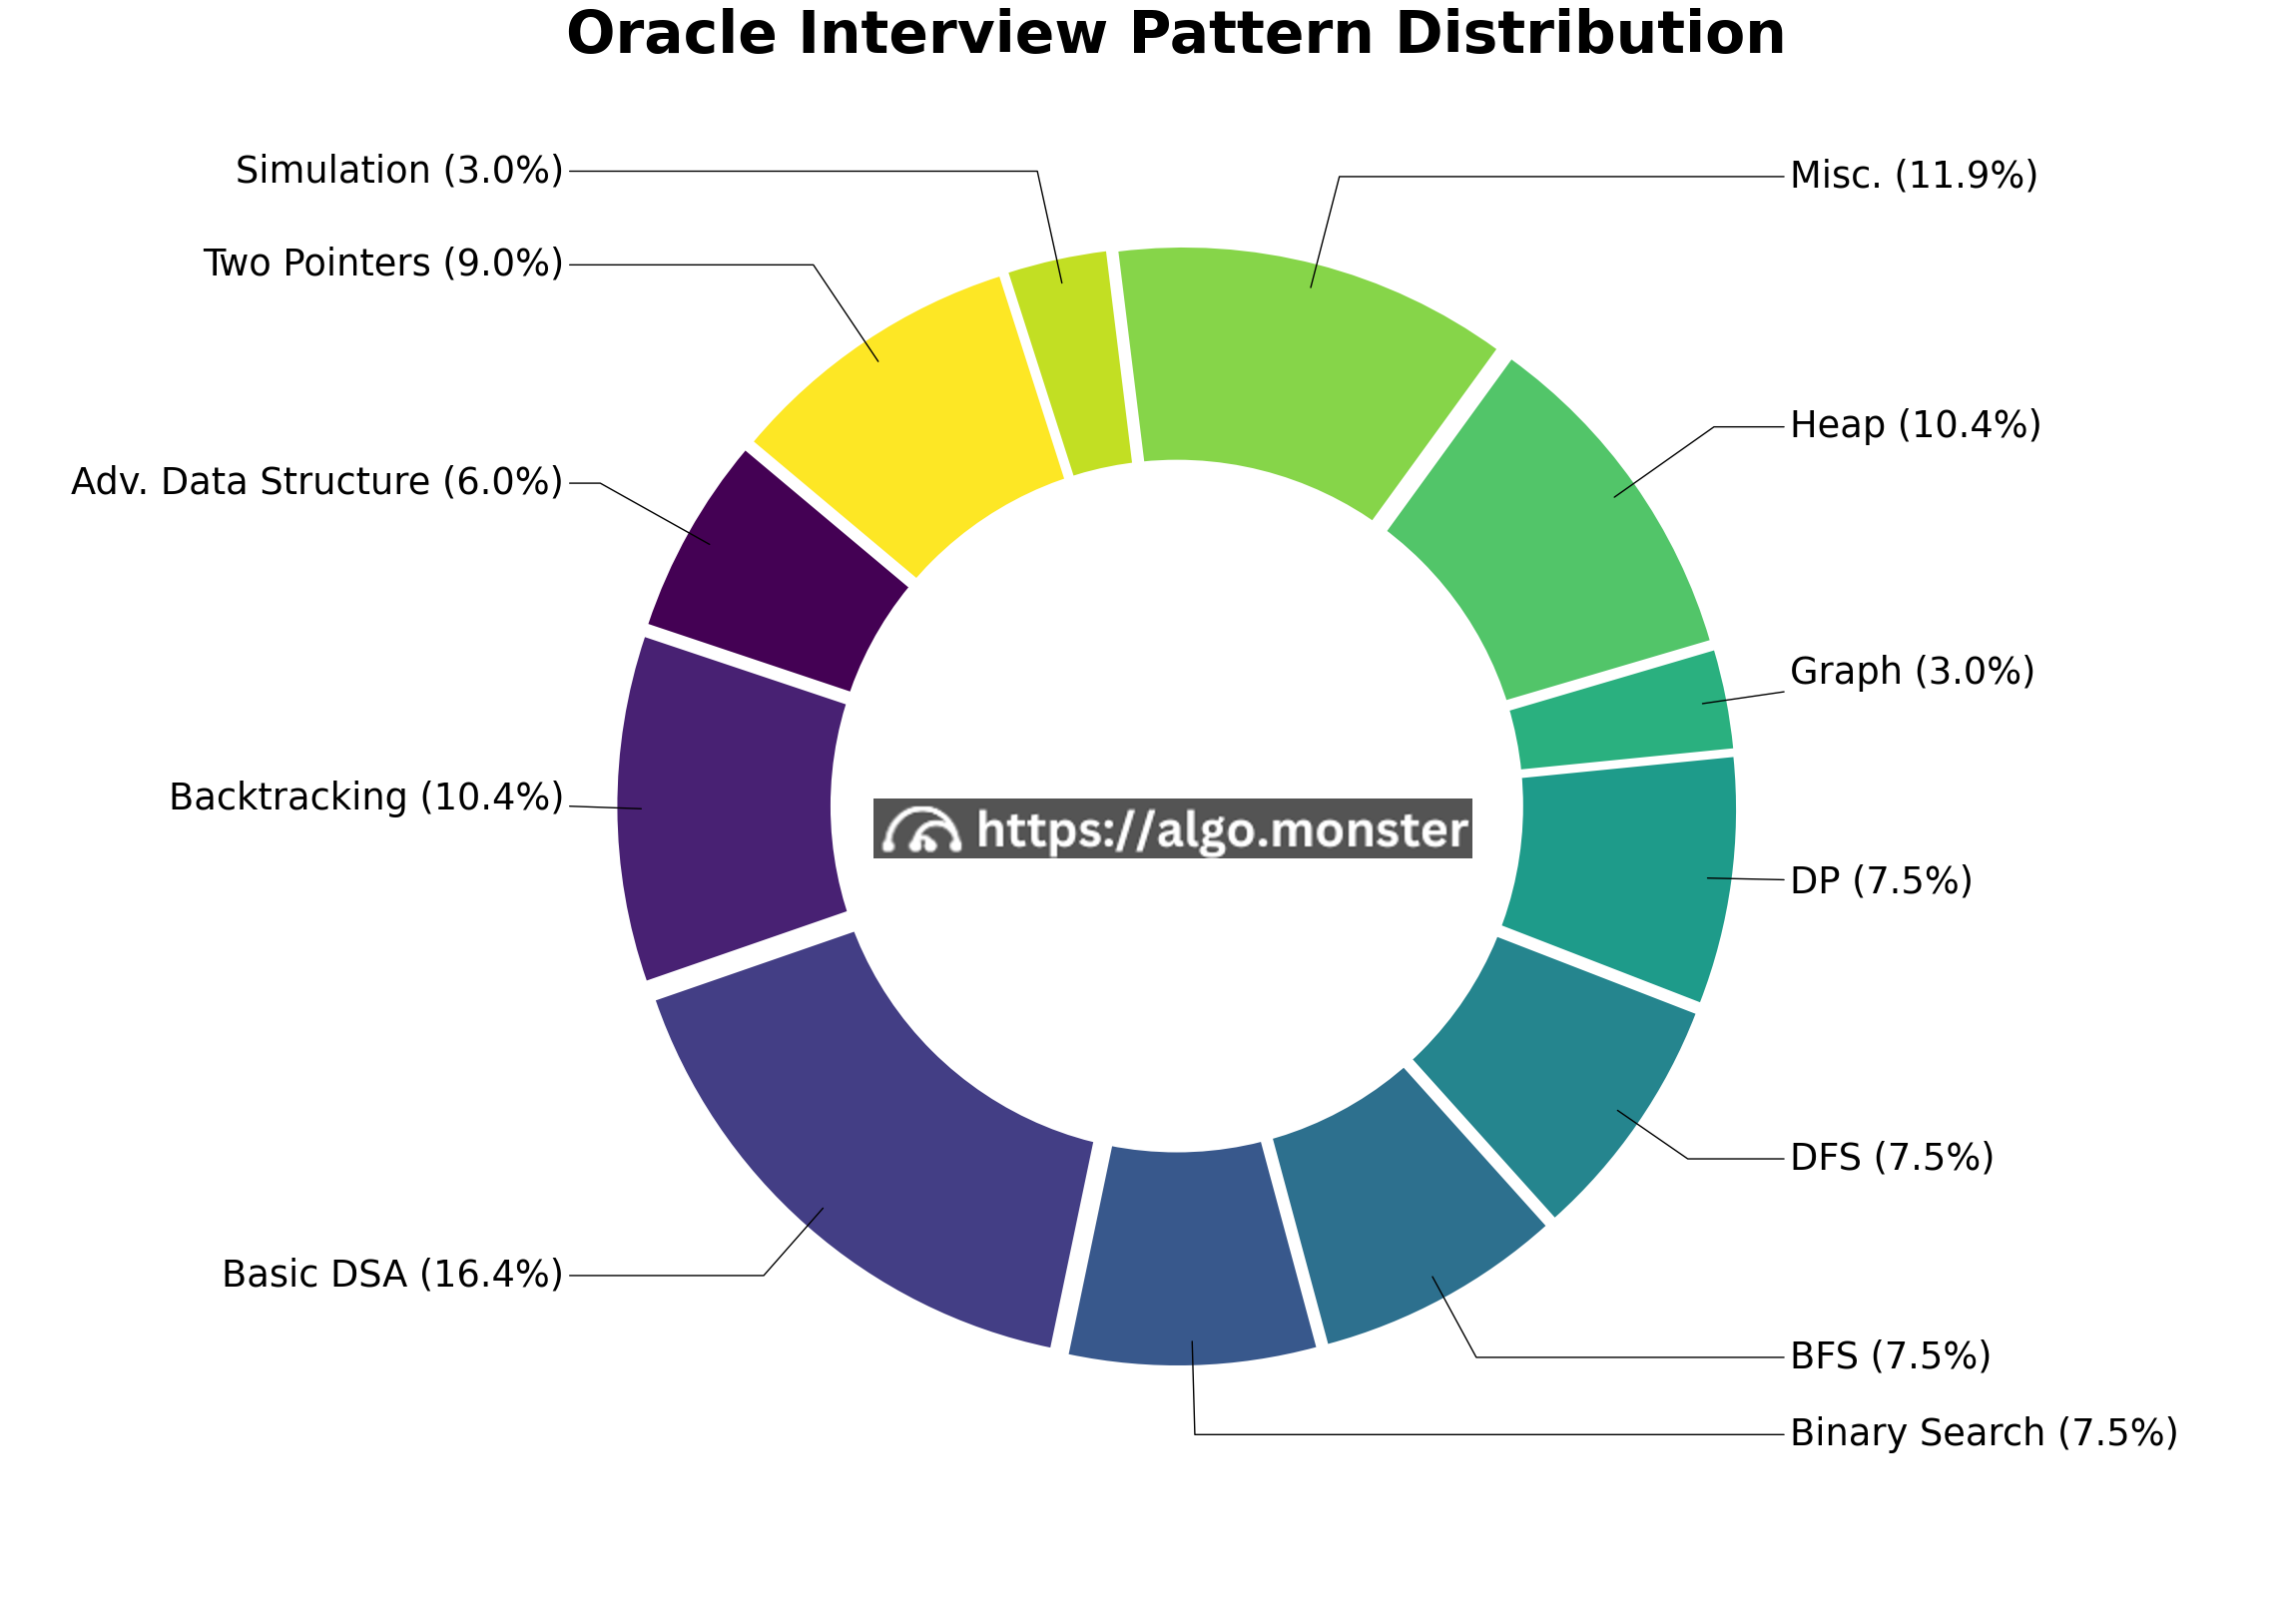 Oracle interview questions breakdown